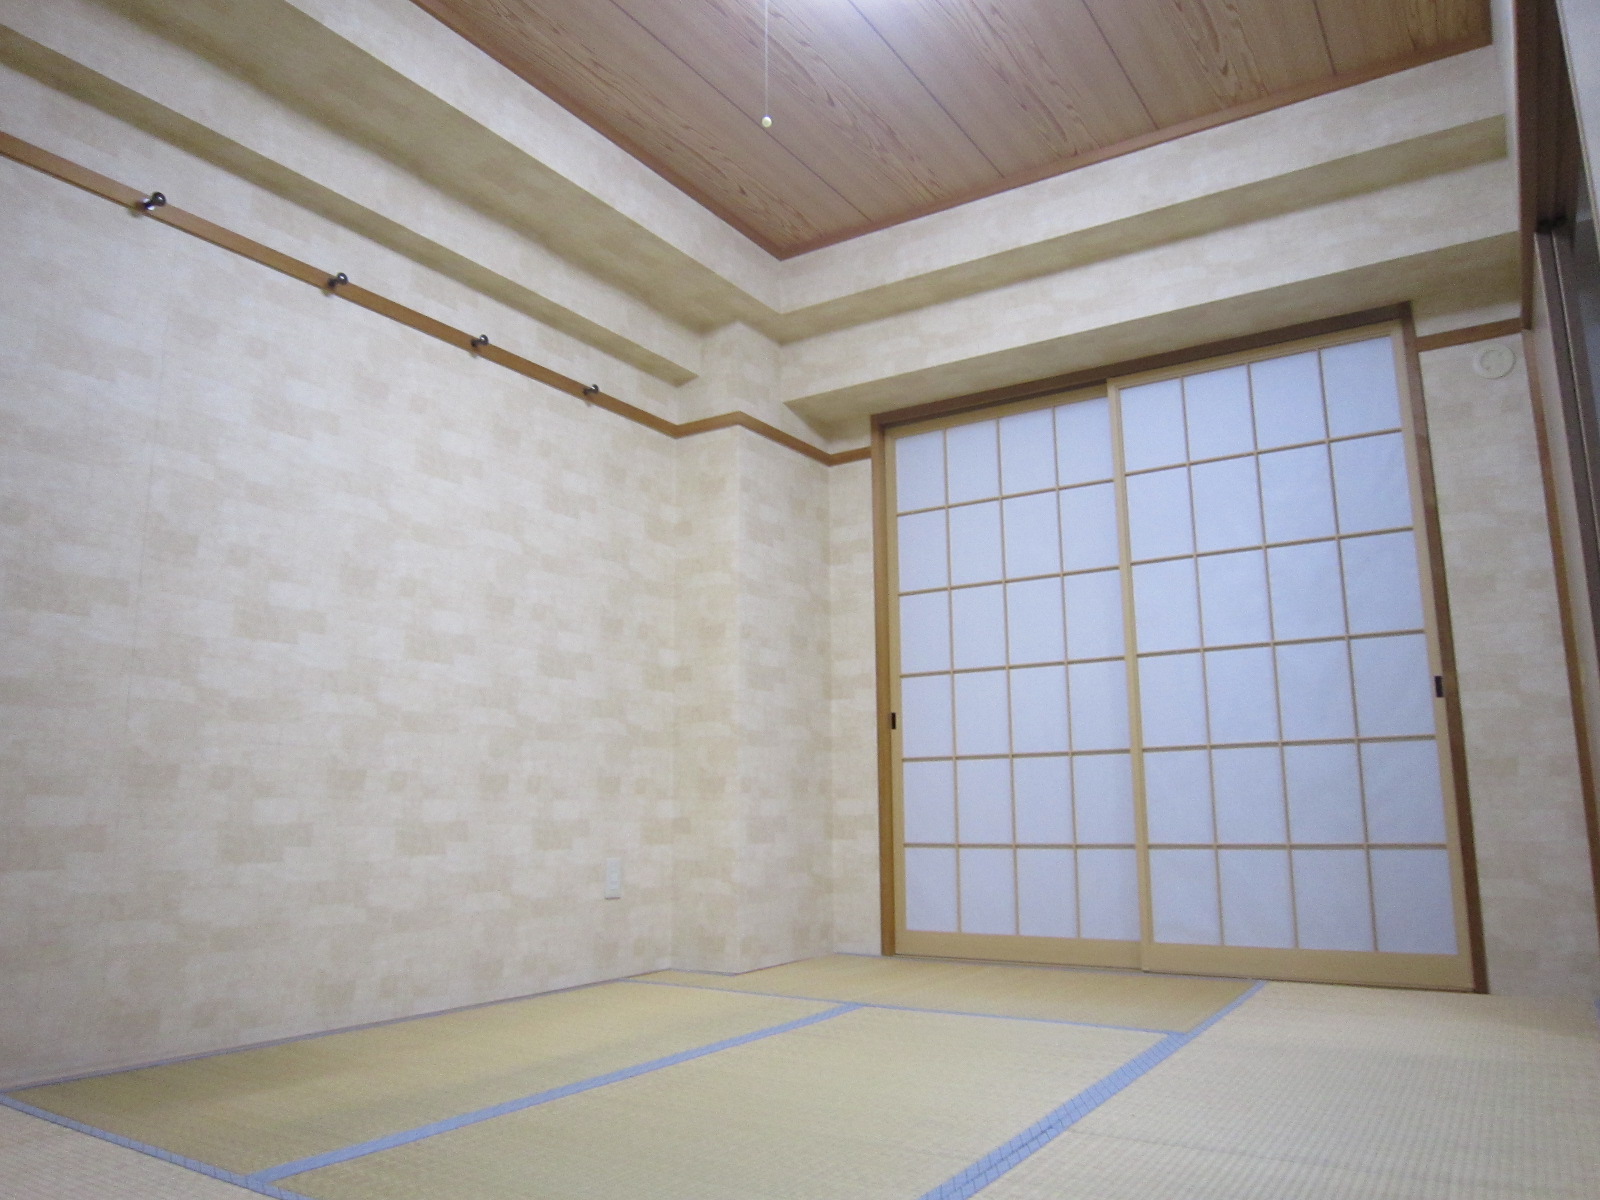 Other room space. Japanese-style room ・ Barrier-free ・ Pair glass